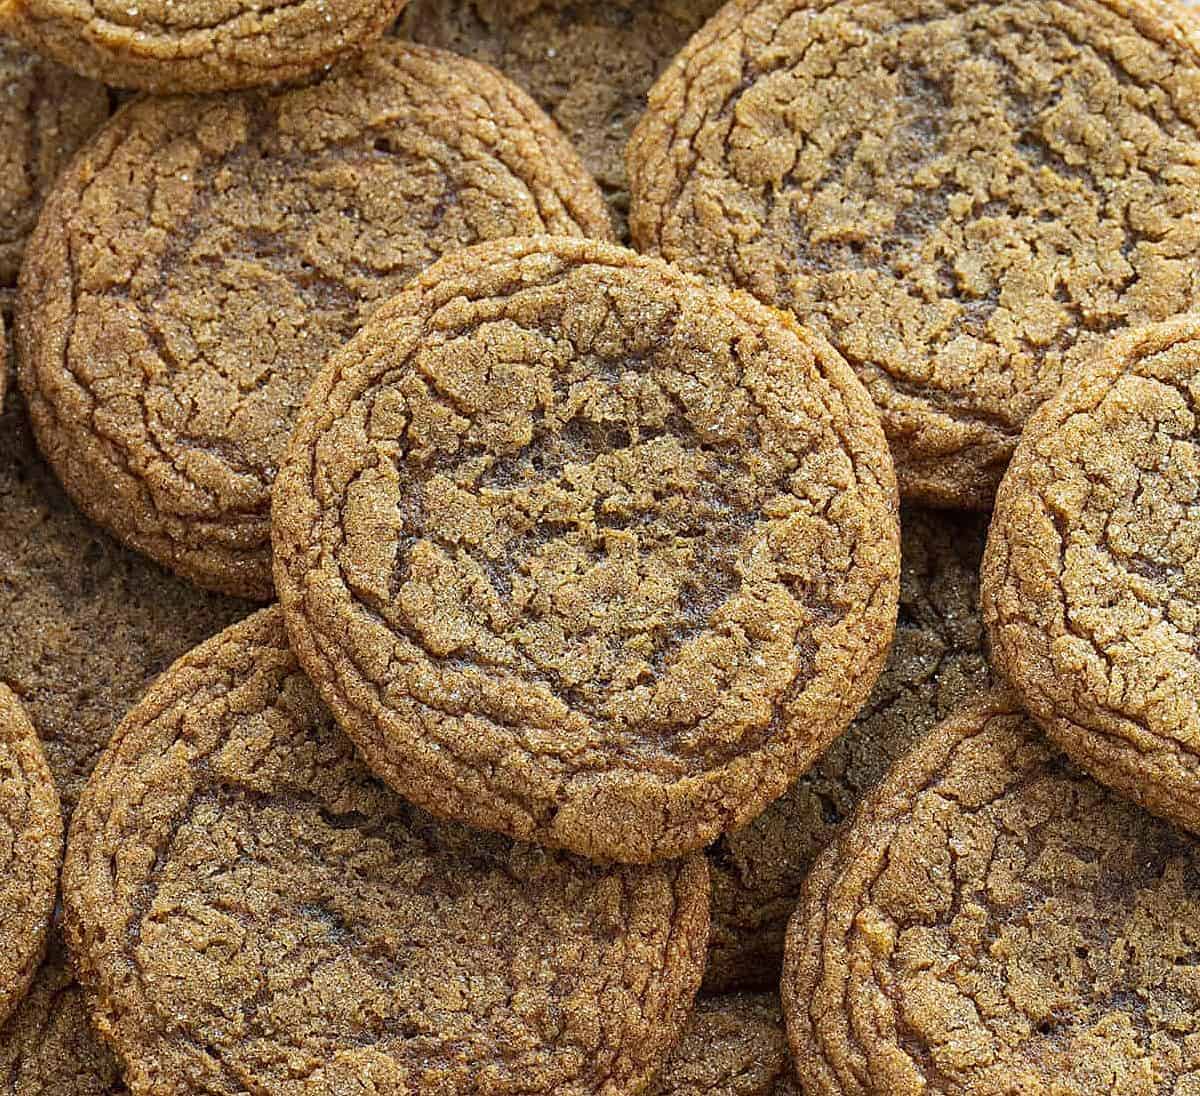  The perfect balance of sweetness and spice, these ginger puff cookies are addictive!